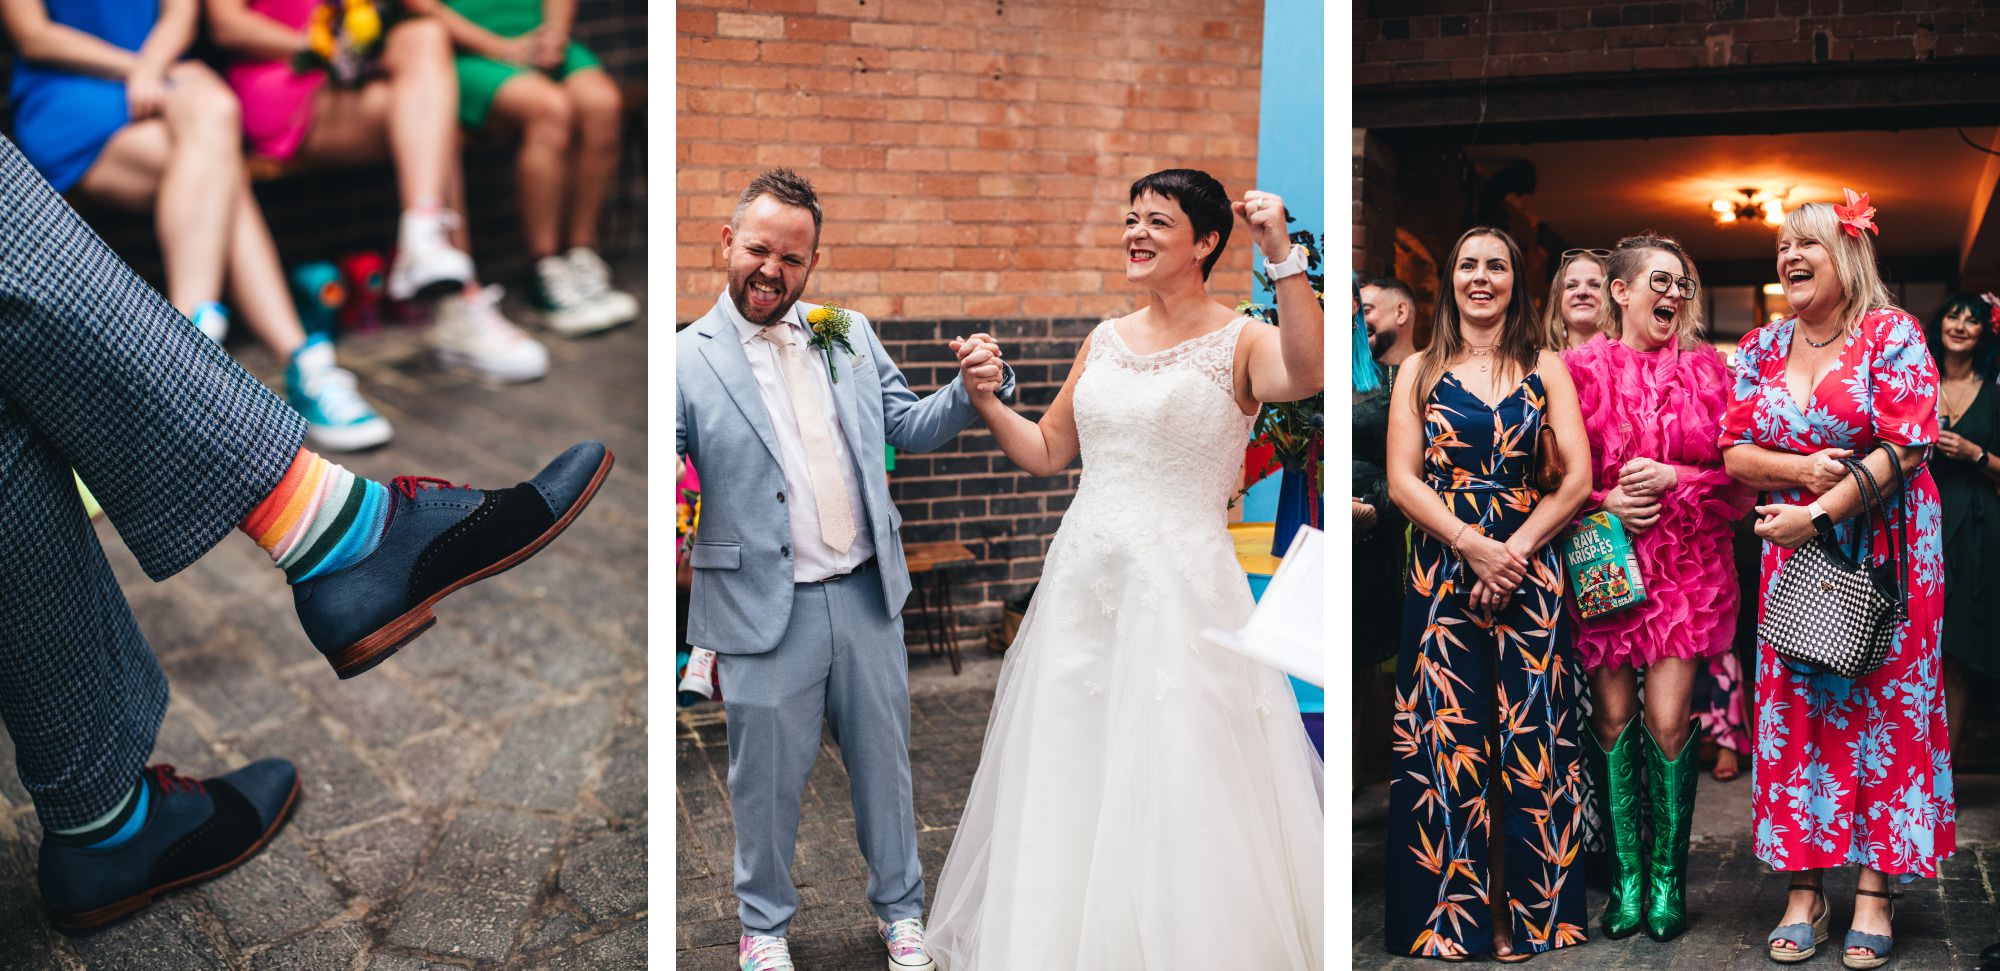 rainbow socks, bride and groom celebrate with fists in air, colourful wedding guests laughing